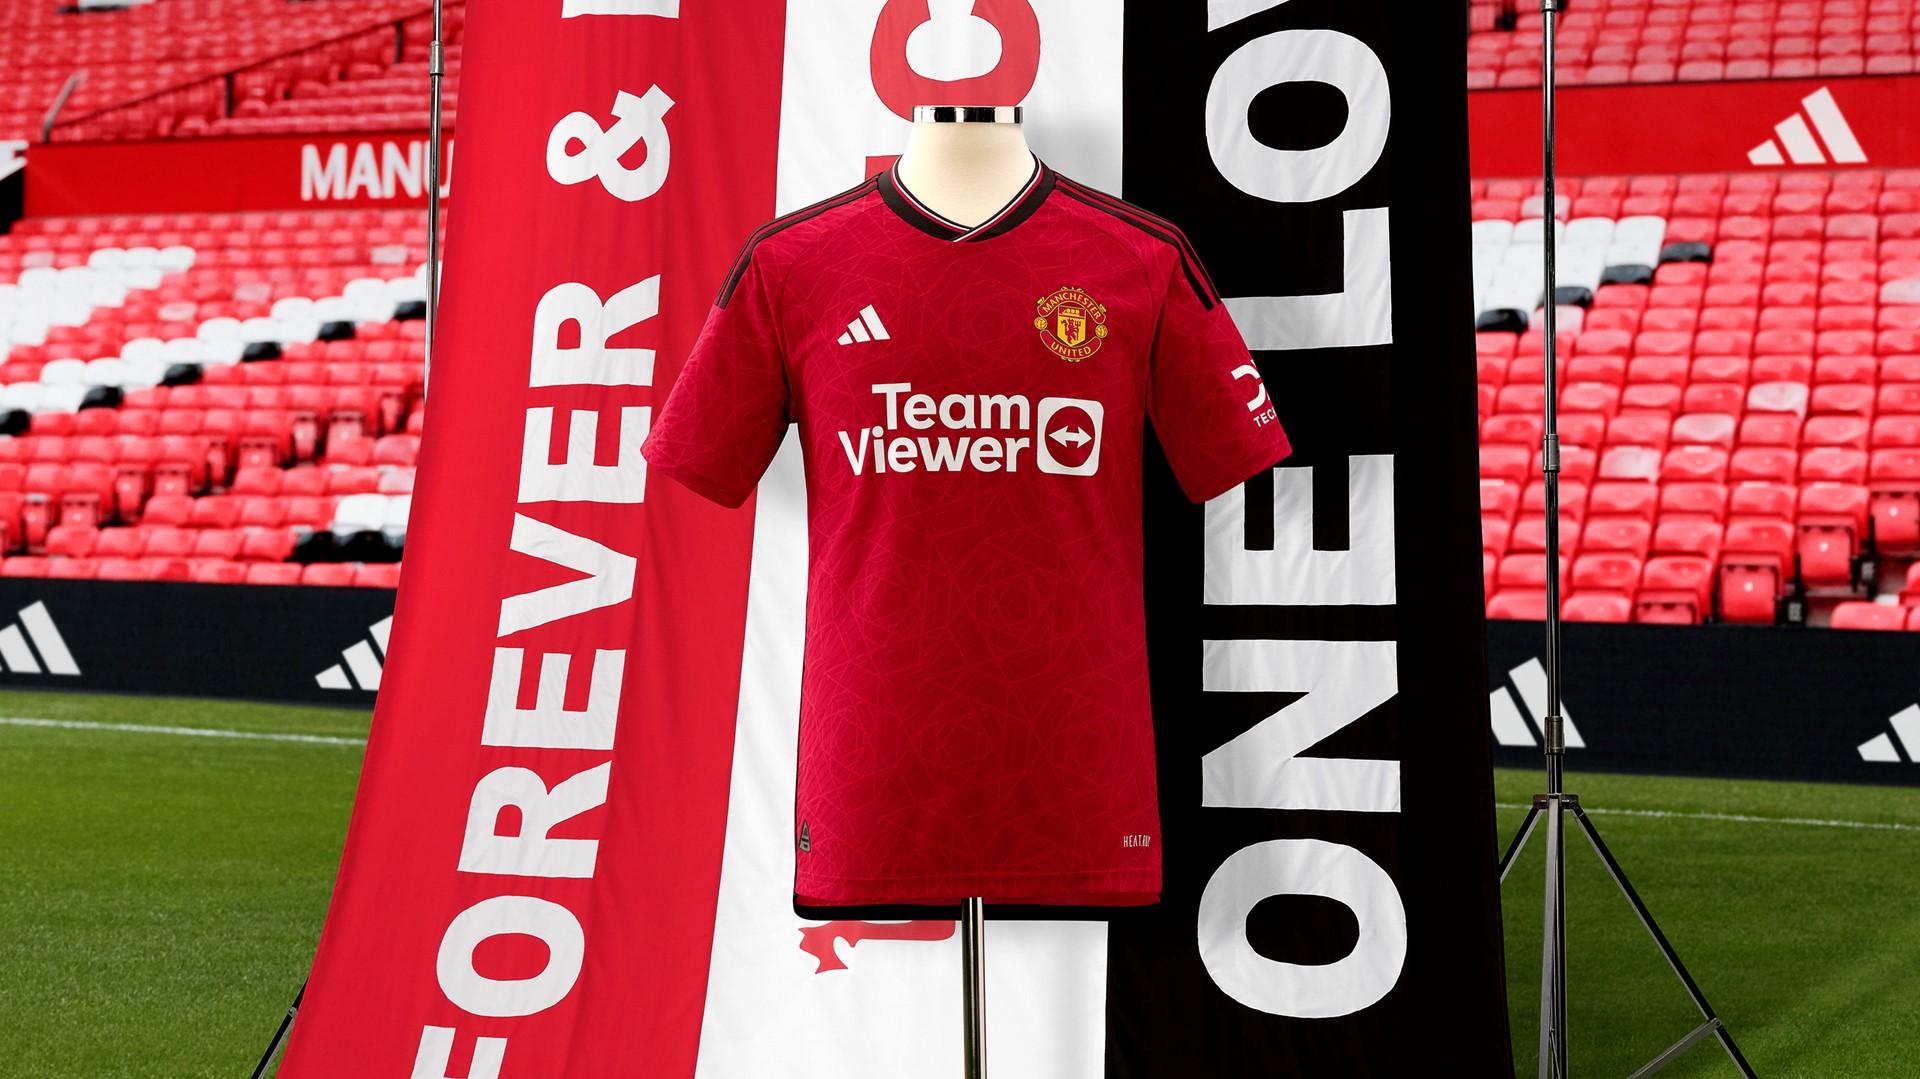 Adidas And Manchester United Launch New Season Home Kit